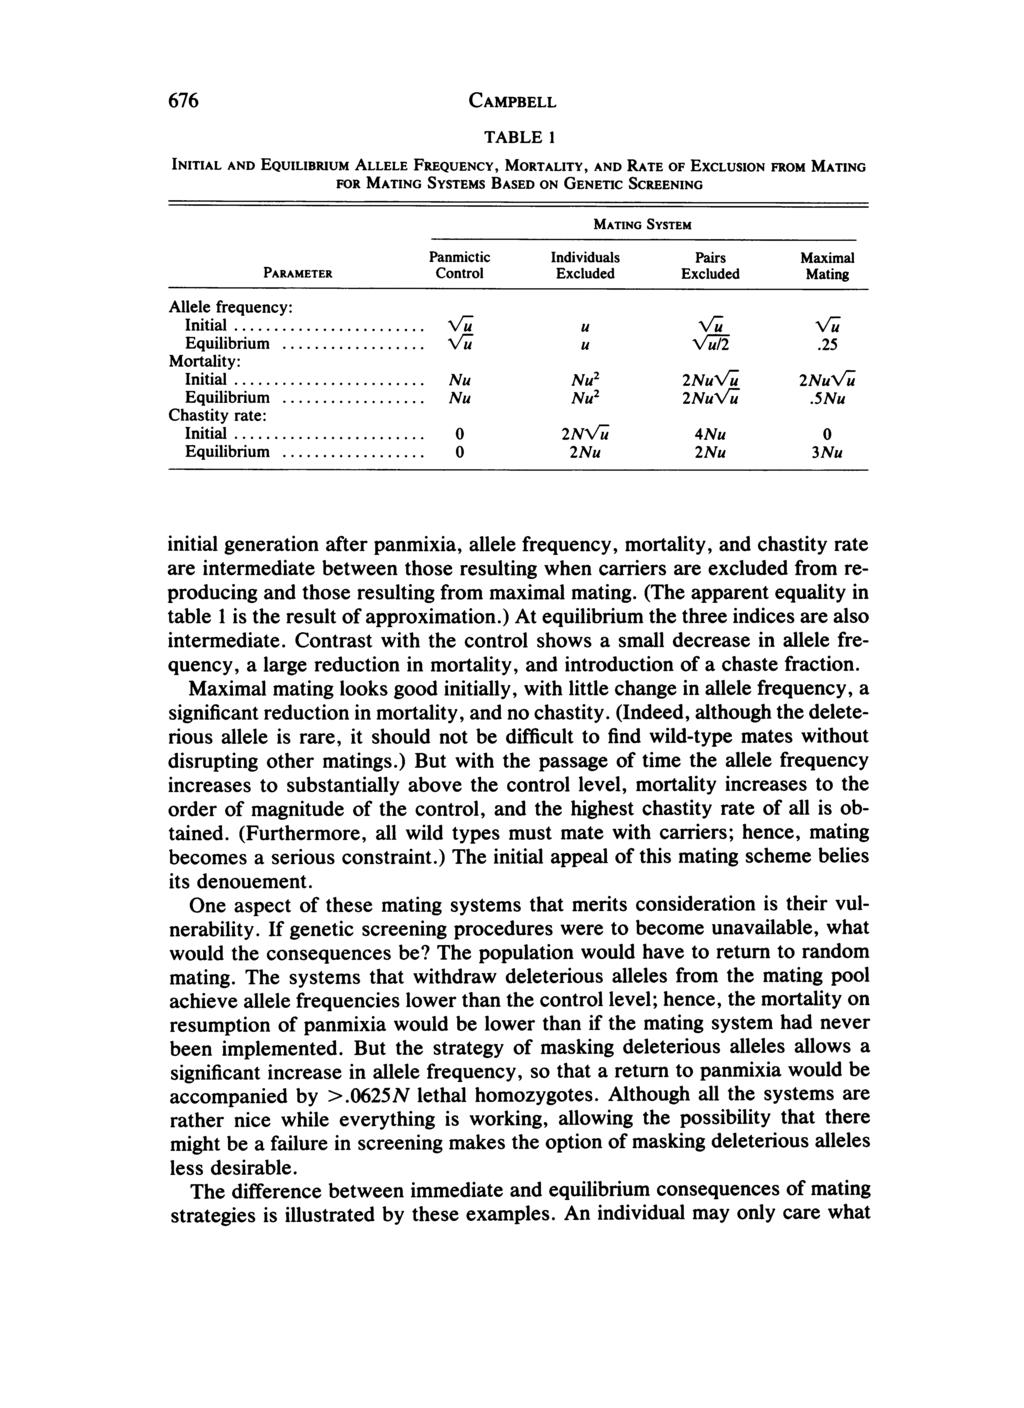 676 CAMPBELL TABLE 1 INITIAL AND EQUILIBRIUM ALLELE FREQUENCY, MORTALITY, AND RATE OF EXCLUSION FROM MATING FOR MATING SYSTEMS BASED ON GENETIC SCREENING Allele frequency: MATING SYSTEM Panmictic